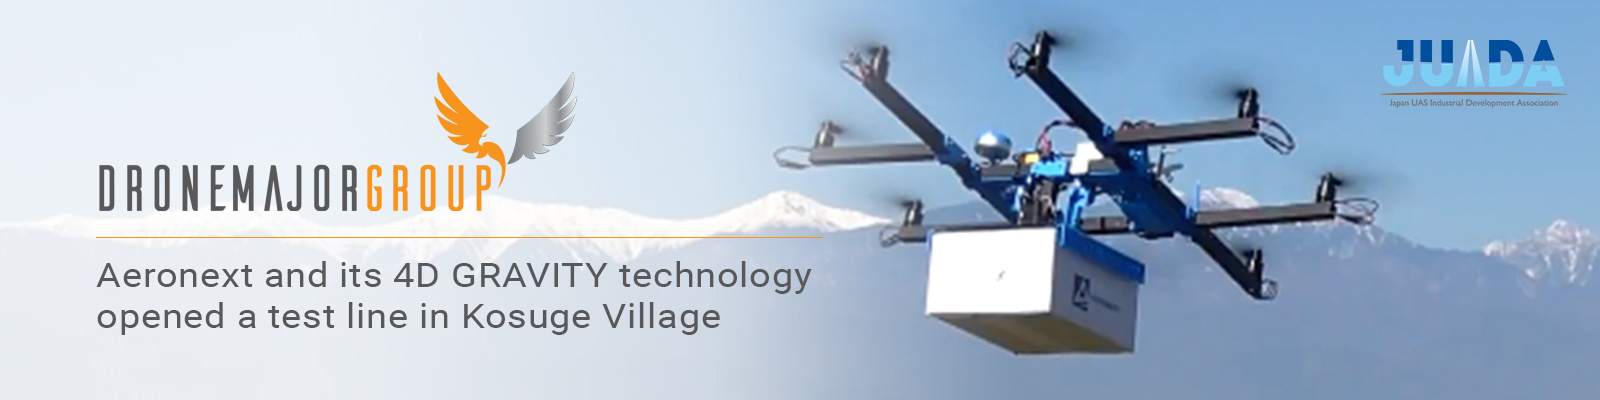 Aeronext and its 4D GRAVITY technology opened a test line in Kosuge Village